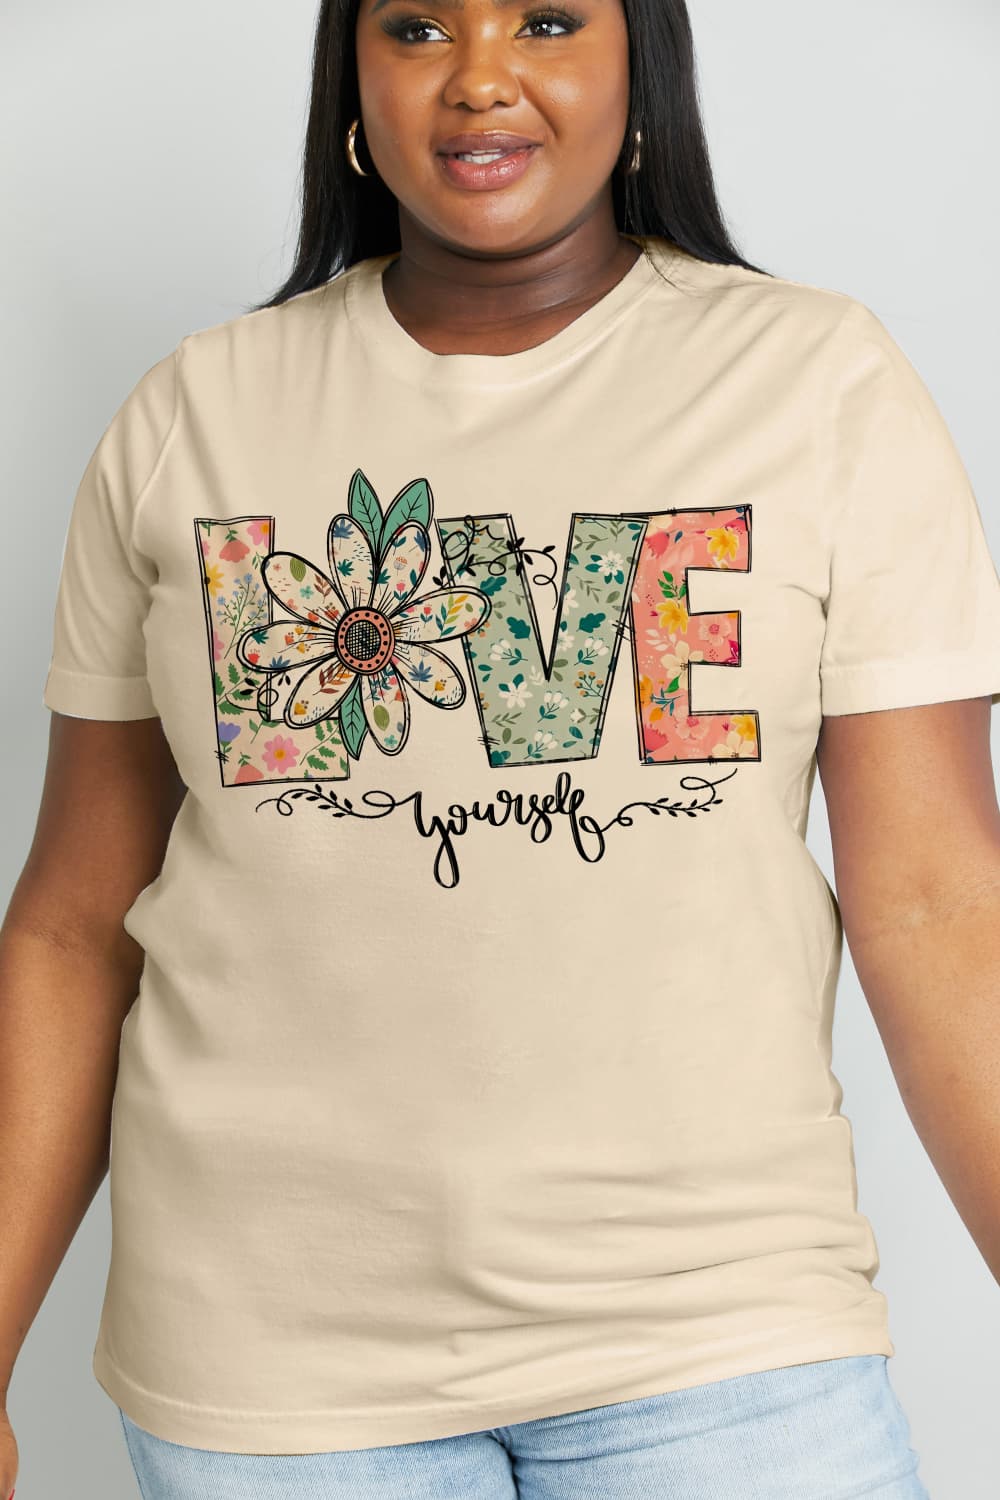 Simply Love... LOVE YOURSELF Graphic Cotton Tee